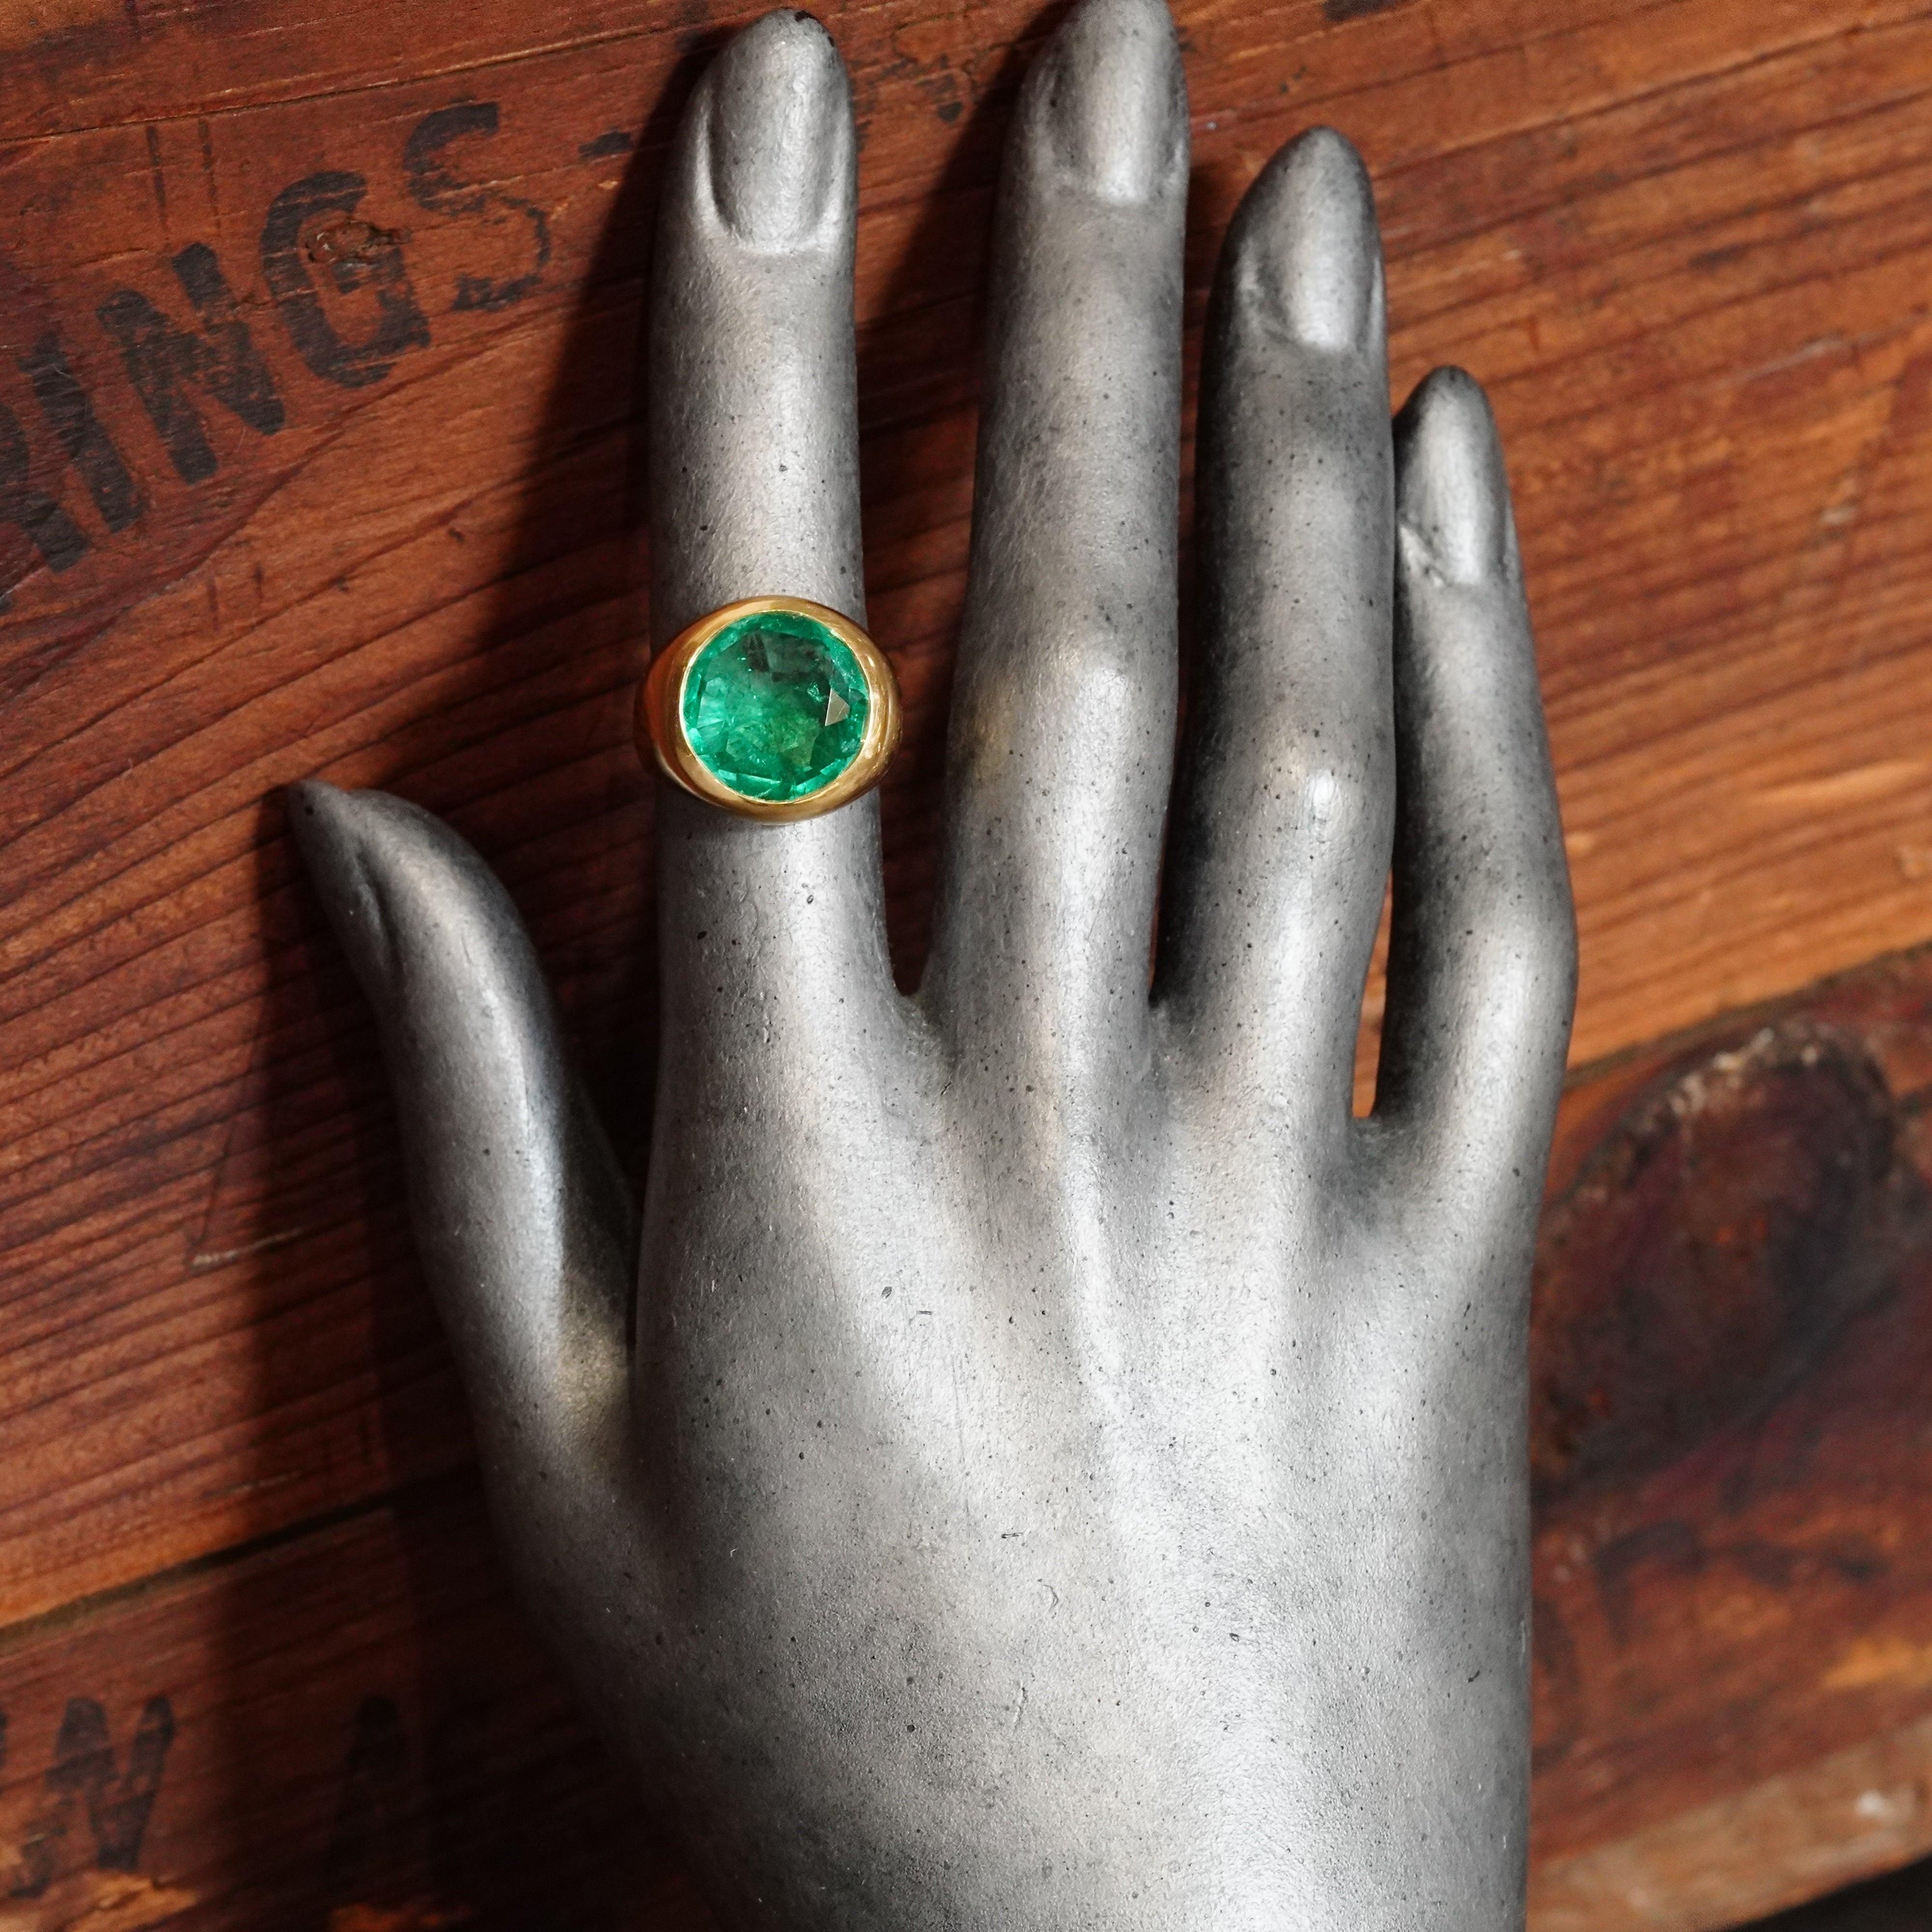 Chivor's Tears: 20K Gold Gypsy Set Ring with Rare Round 7.48 CT Colombian Emerald from Chivor Mine - Jogani